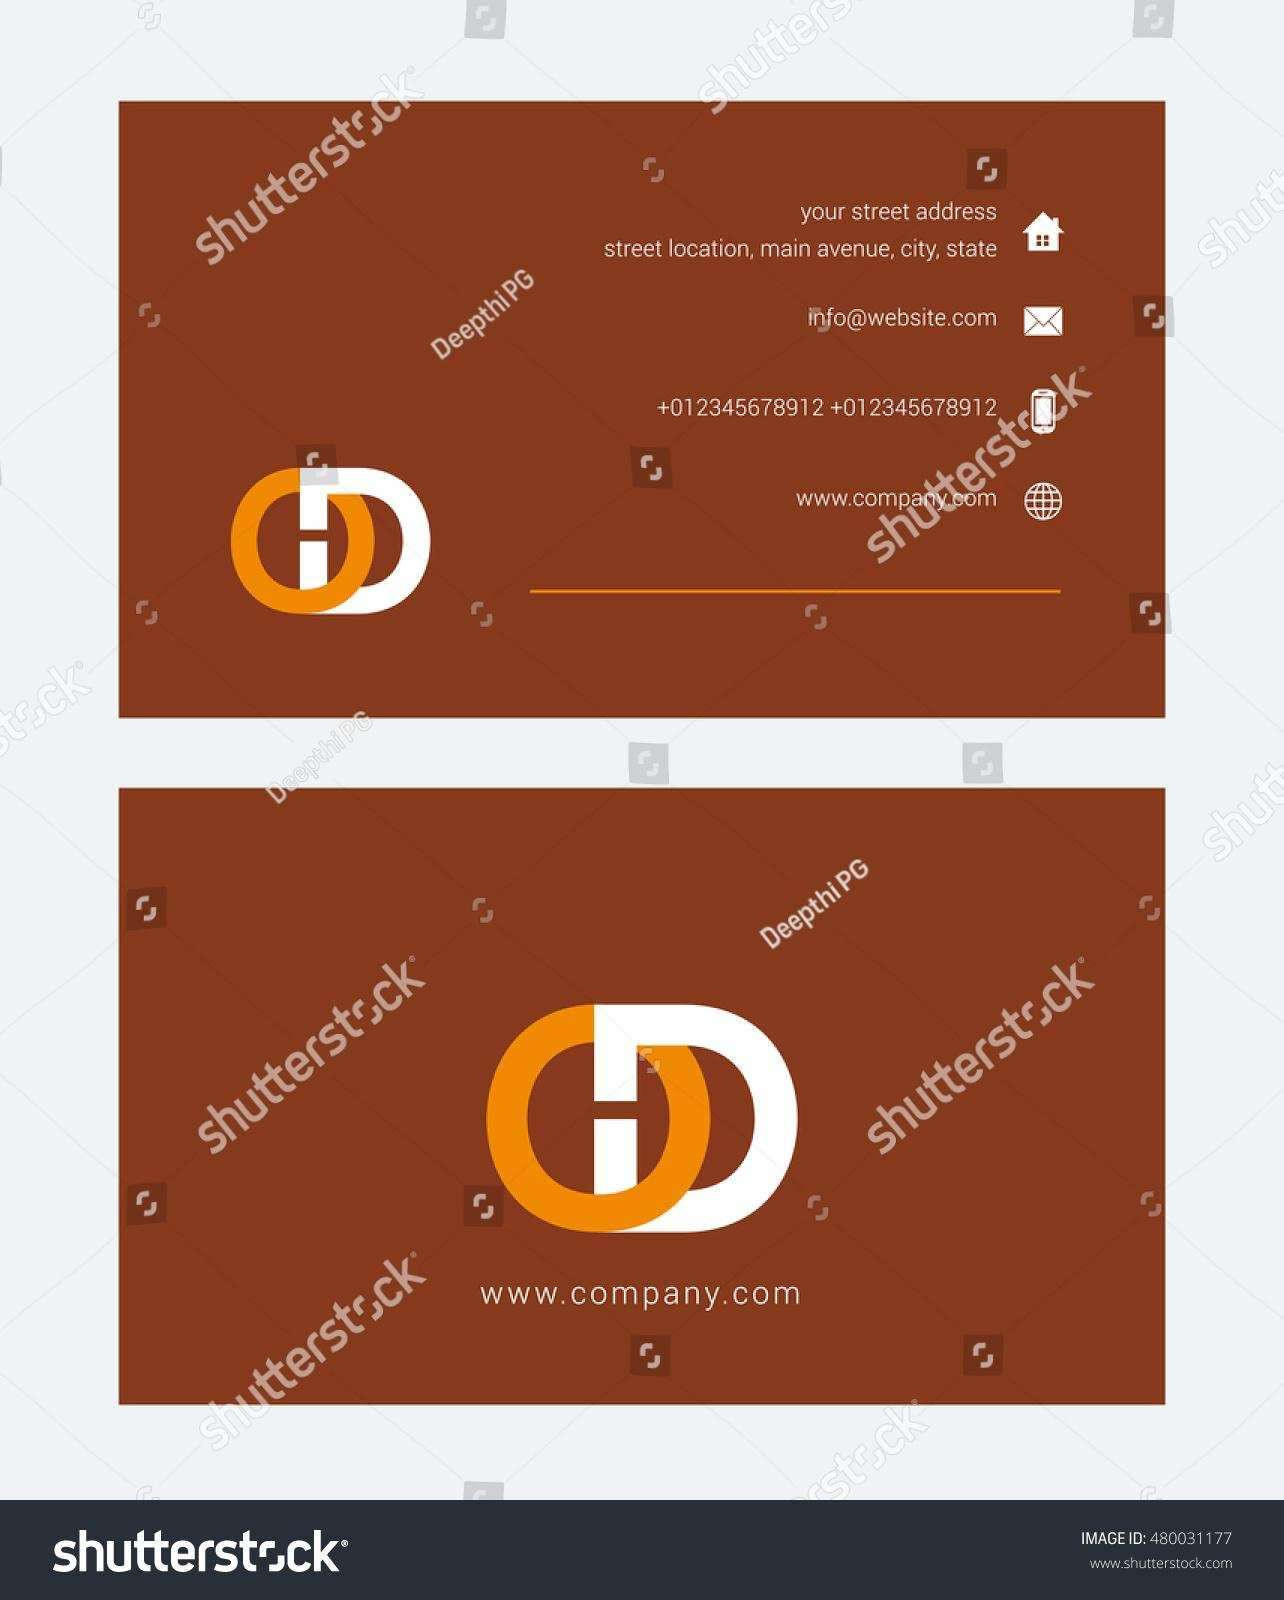 Business Card Powerpoint Templates Free Caquetapositivo Of Free Corporate Business Card Templates